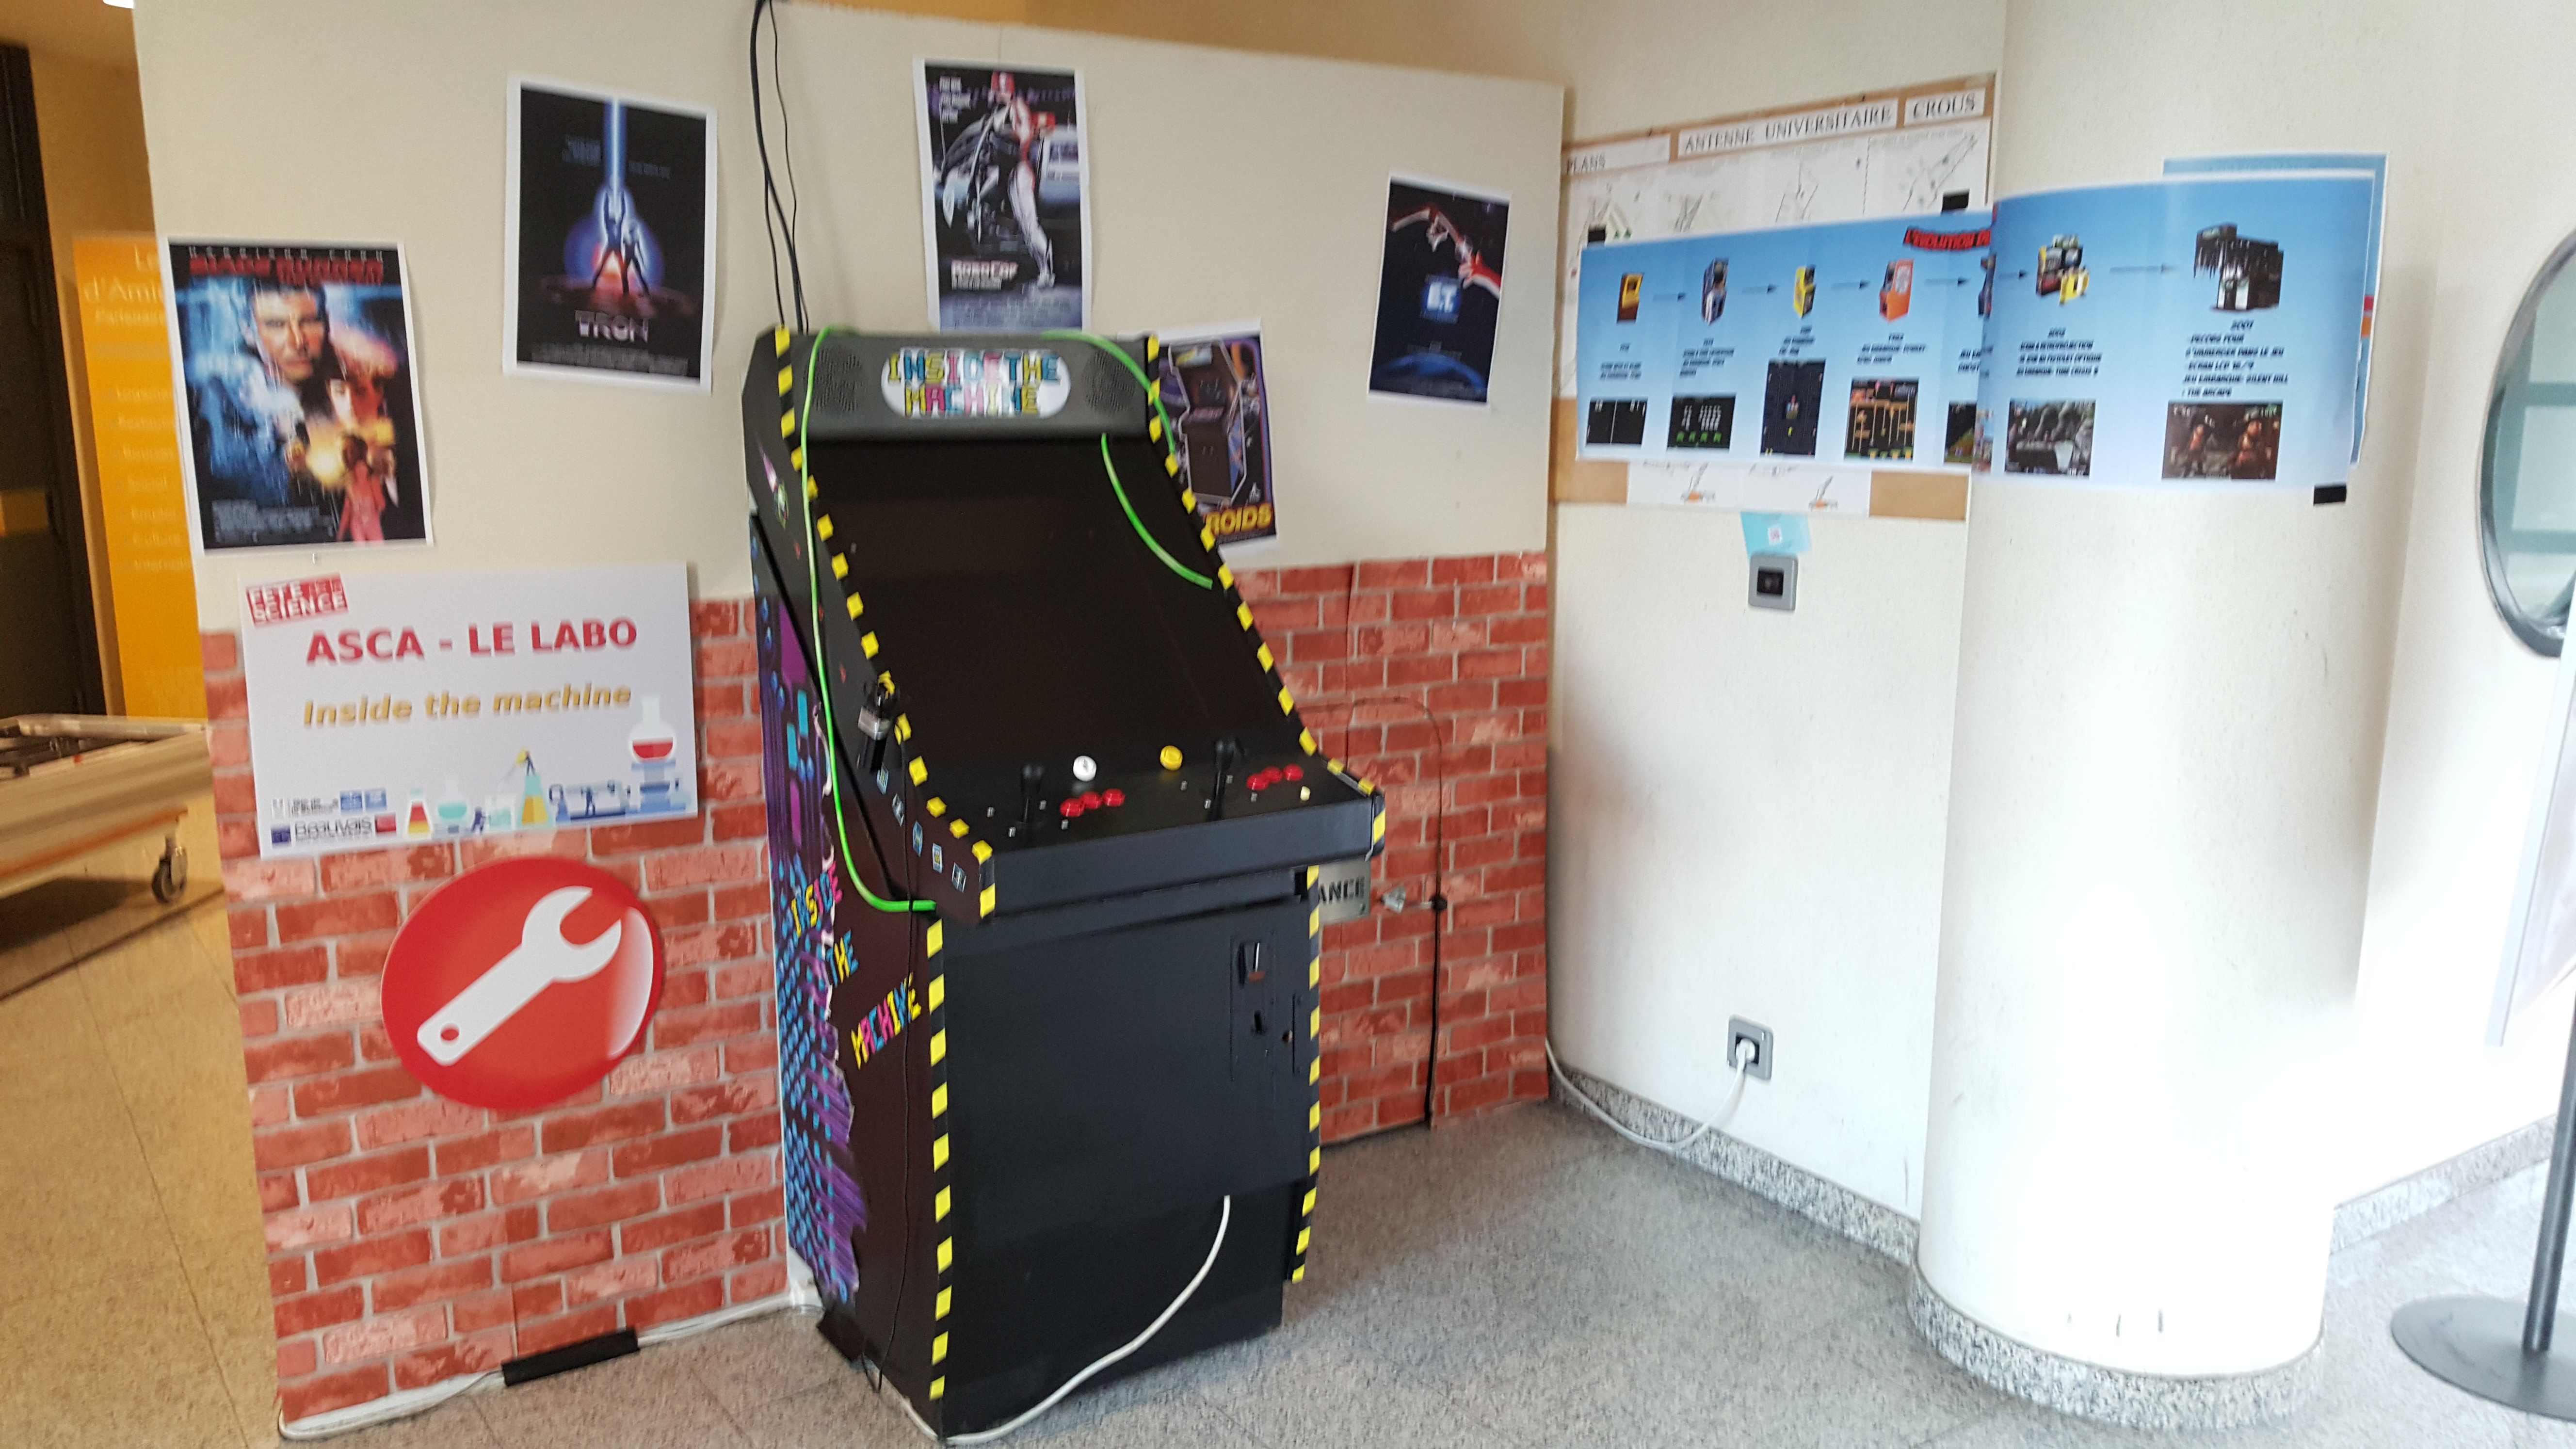 The arcade exposed in a university in Beauvais, France.